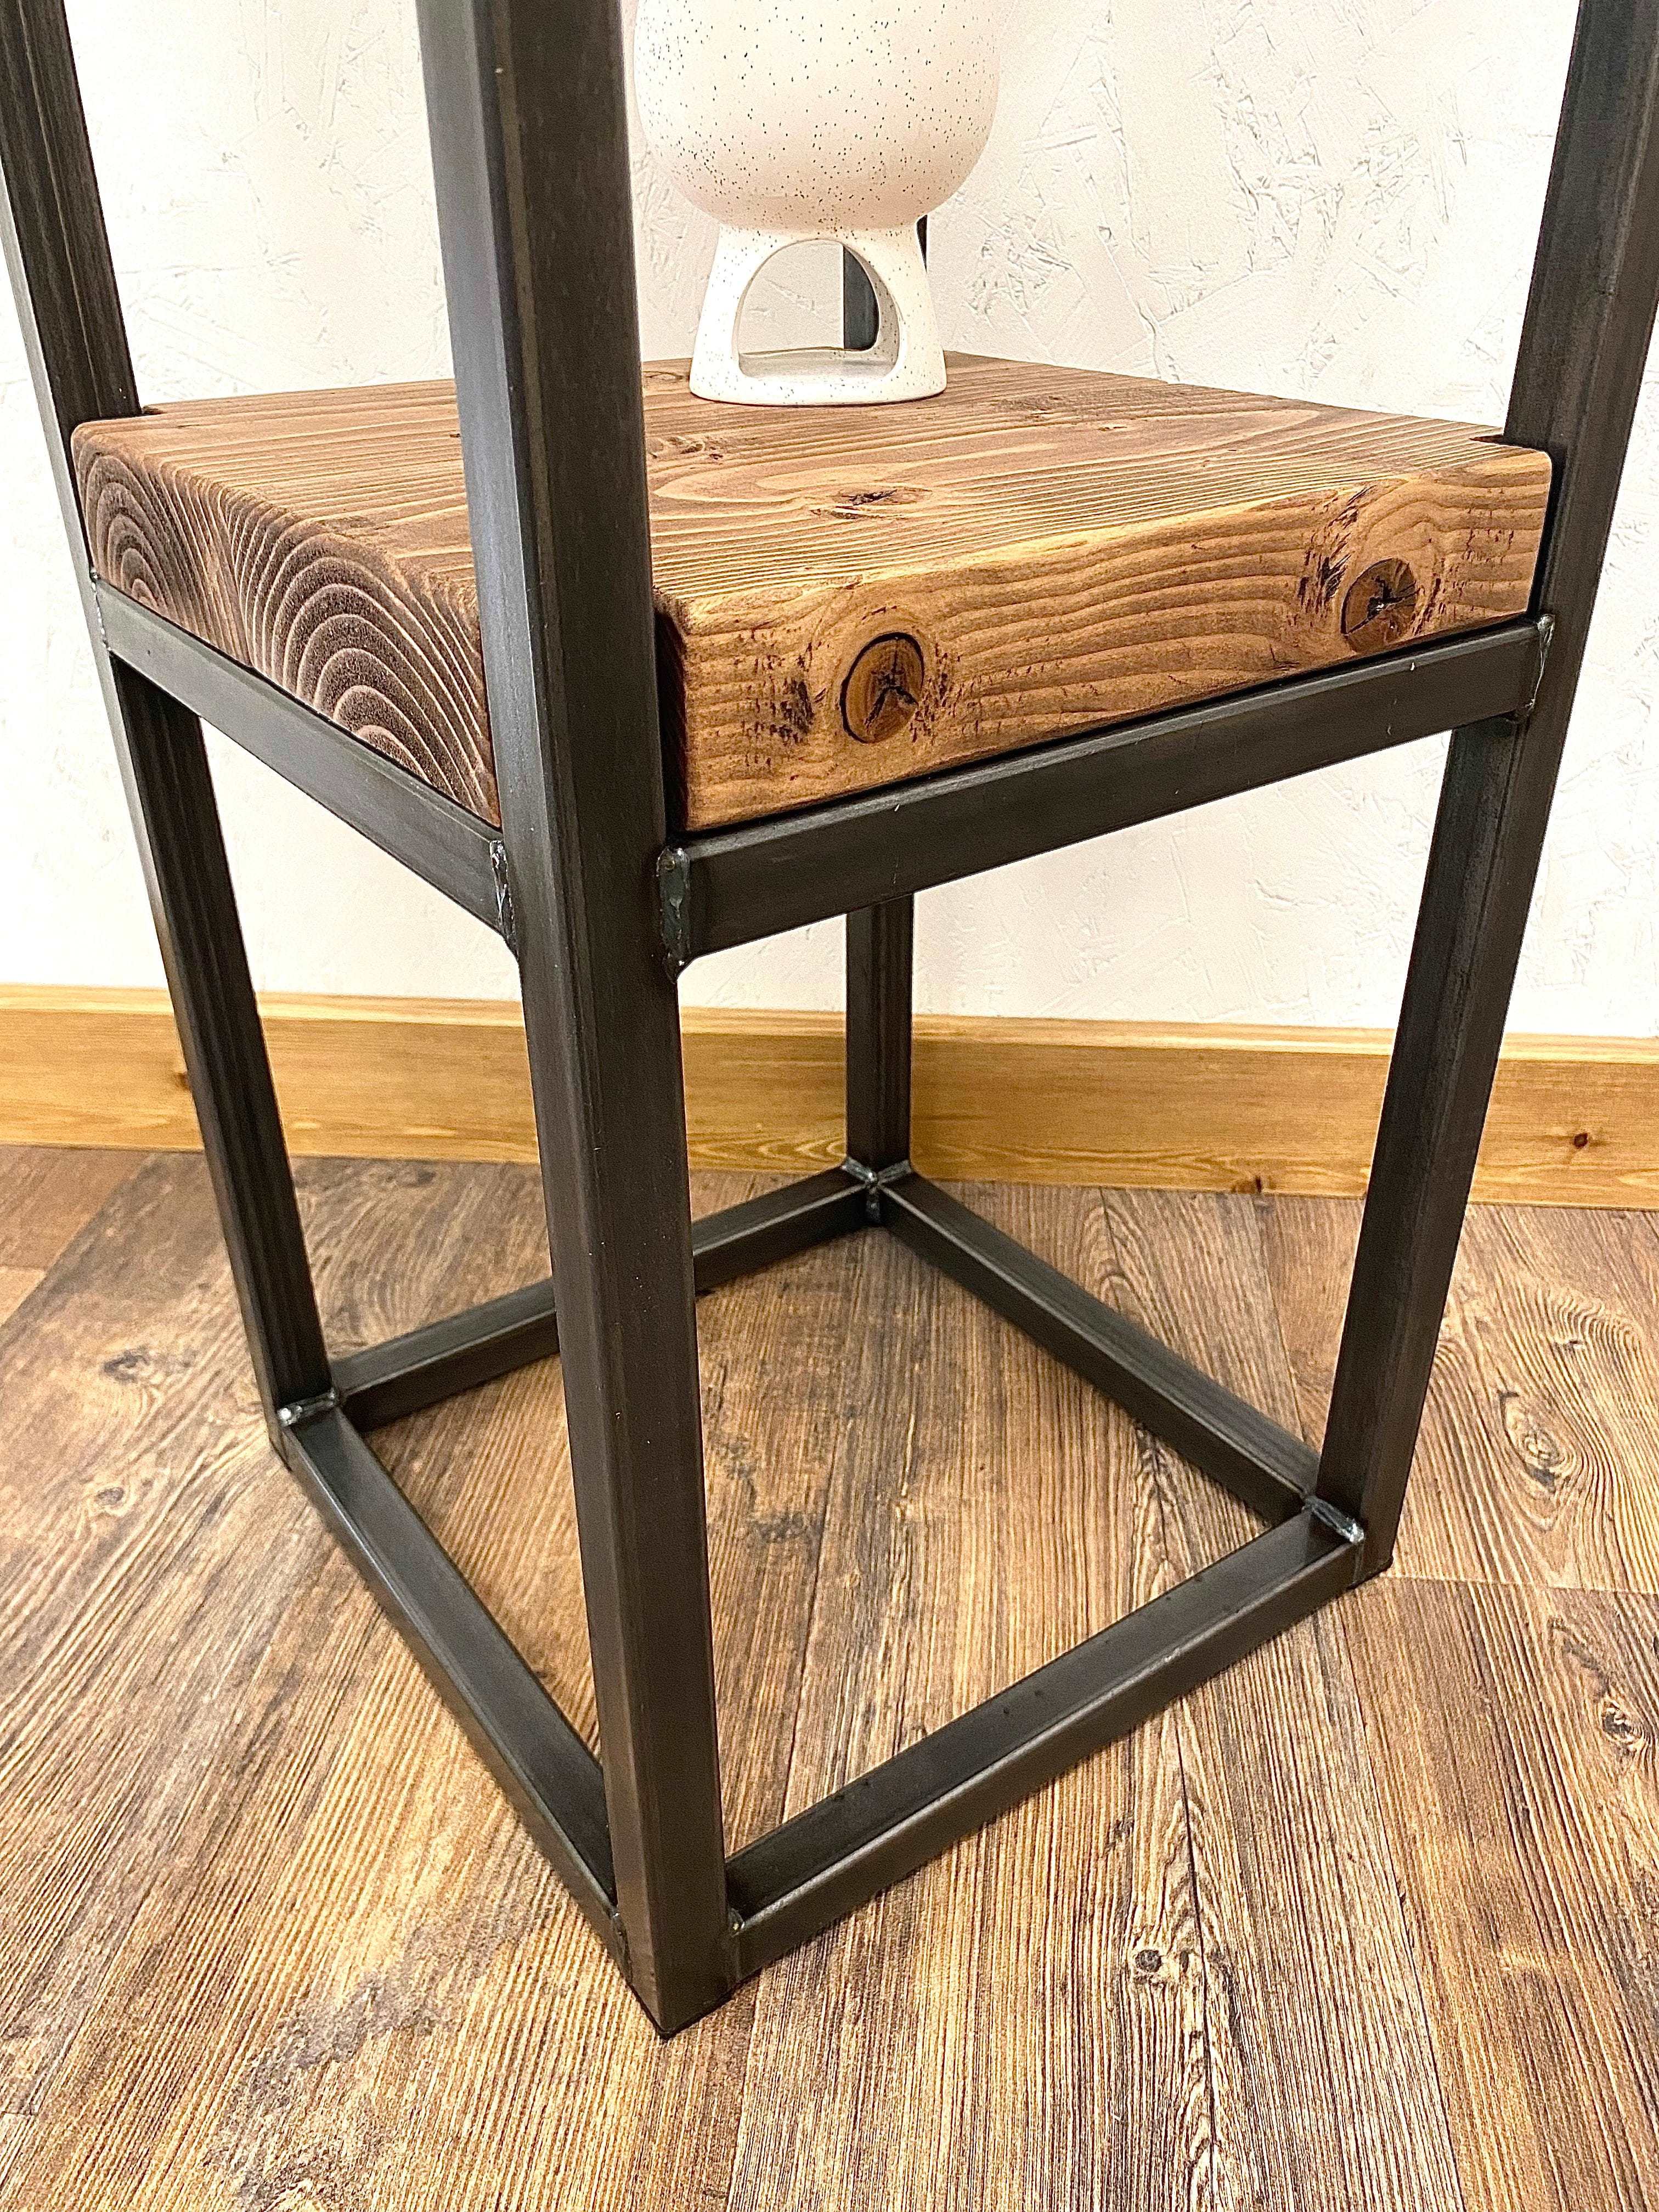 Rustic Industrial Side Table with Shelf Rustic TV stand RSD Furniture   